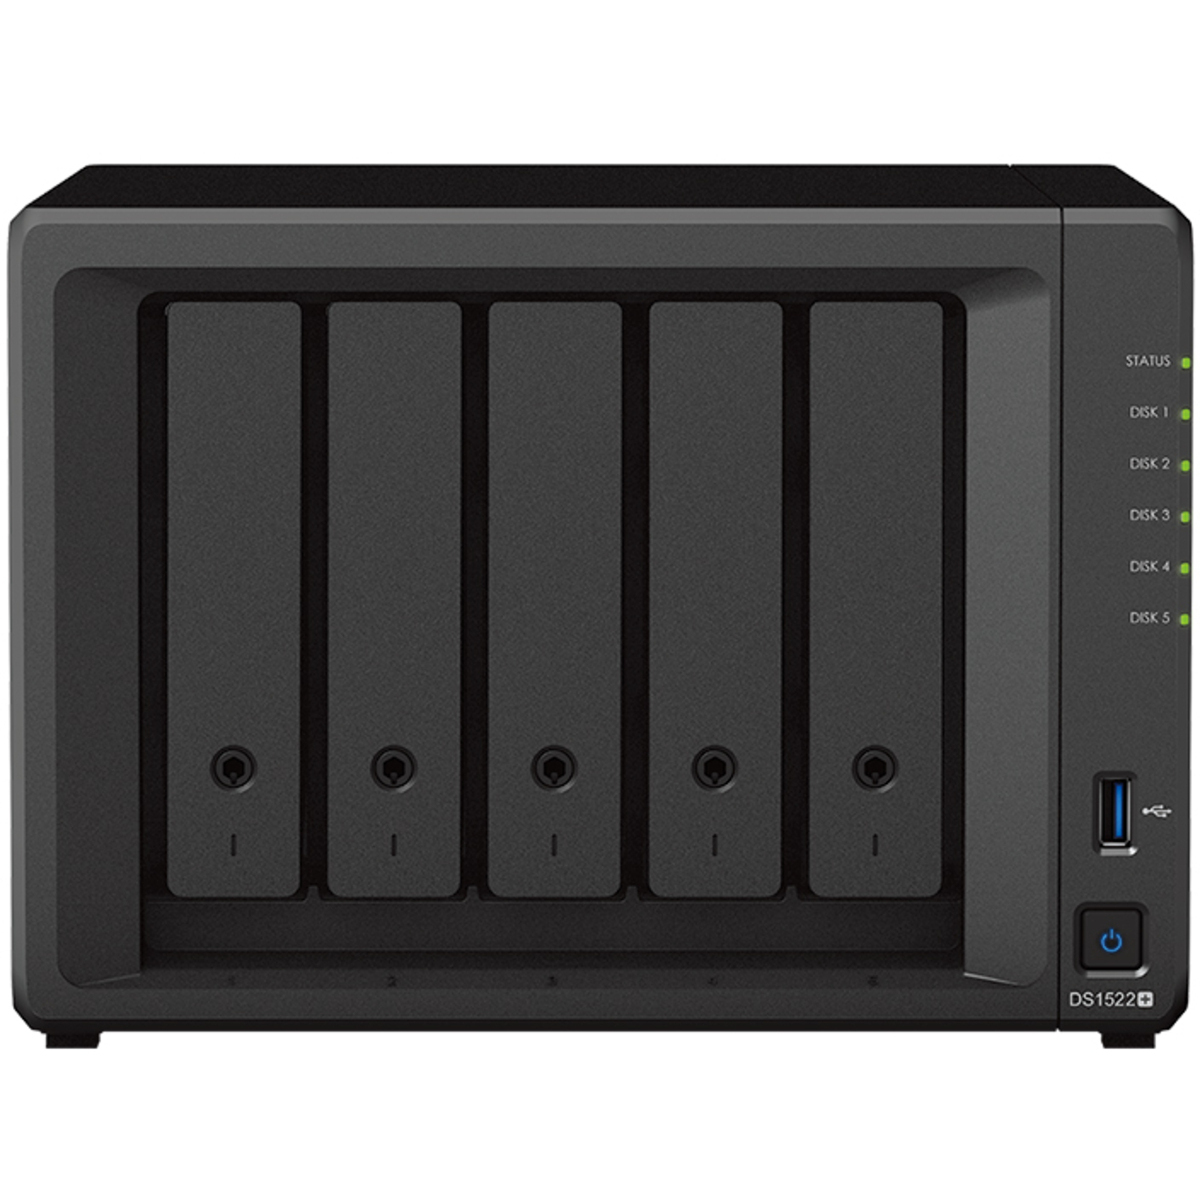 Synology DiskStation DS1522+ 40tb 5-Bay Desktop Multimedia / Power User / Business NAS - Network Attached Storage Device 4x10tb Seagate IronWolf Pro ST10000NT001 3.5 7200rpm SATA 6Gb/s HDD NAS Class Drives Installed - Burn-In Tested - ON SALE DiskStation DS1522+